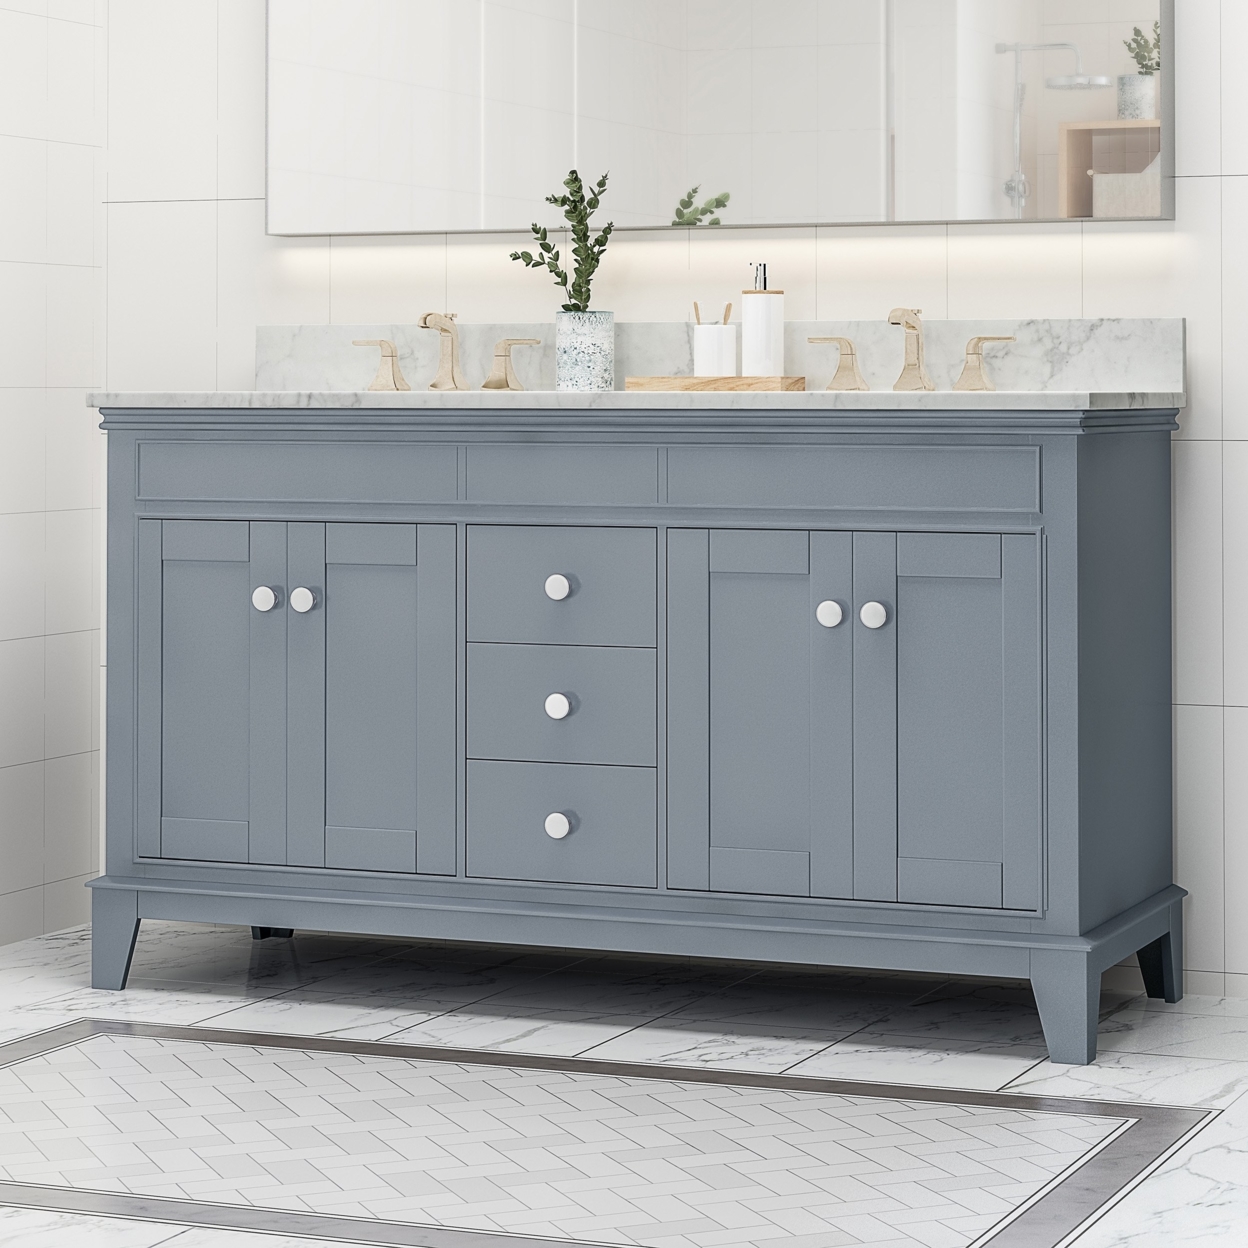 Feldspar Contemporary 60 Wood Double Sink Bathroom Vanity With Marble Counter Top With Carrara White Marble - Gray